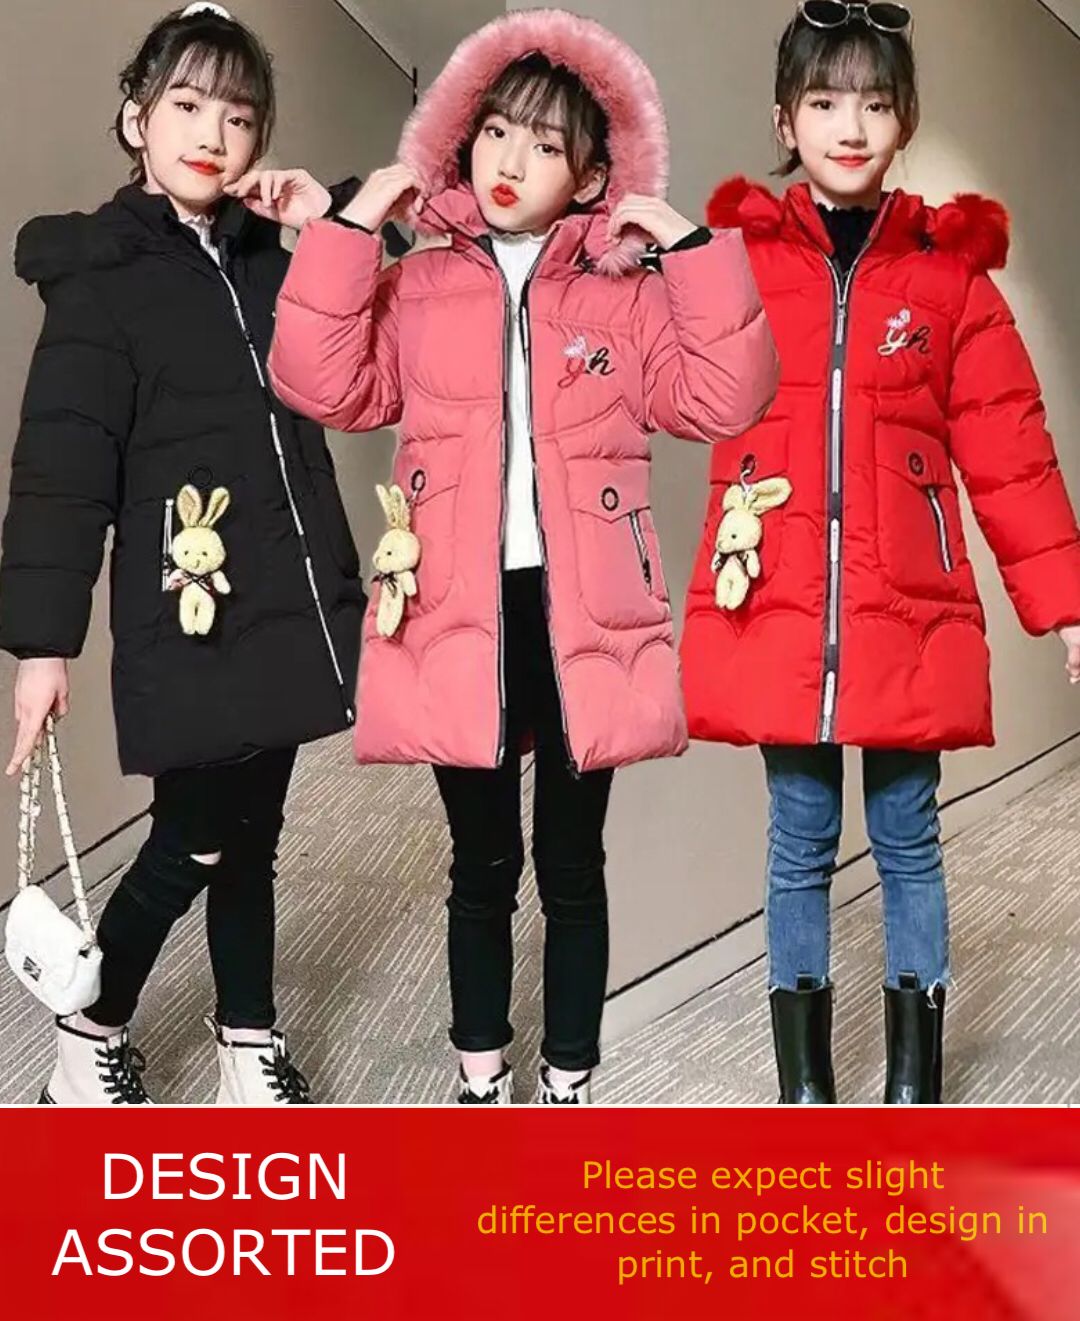 Winter Soft Warm Jacket for Girls | Thermal C202